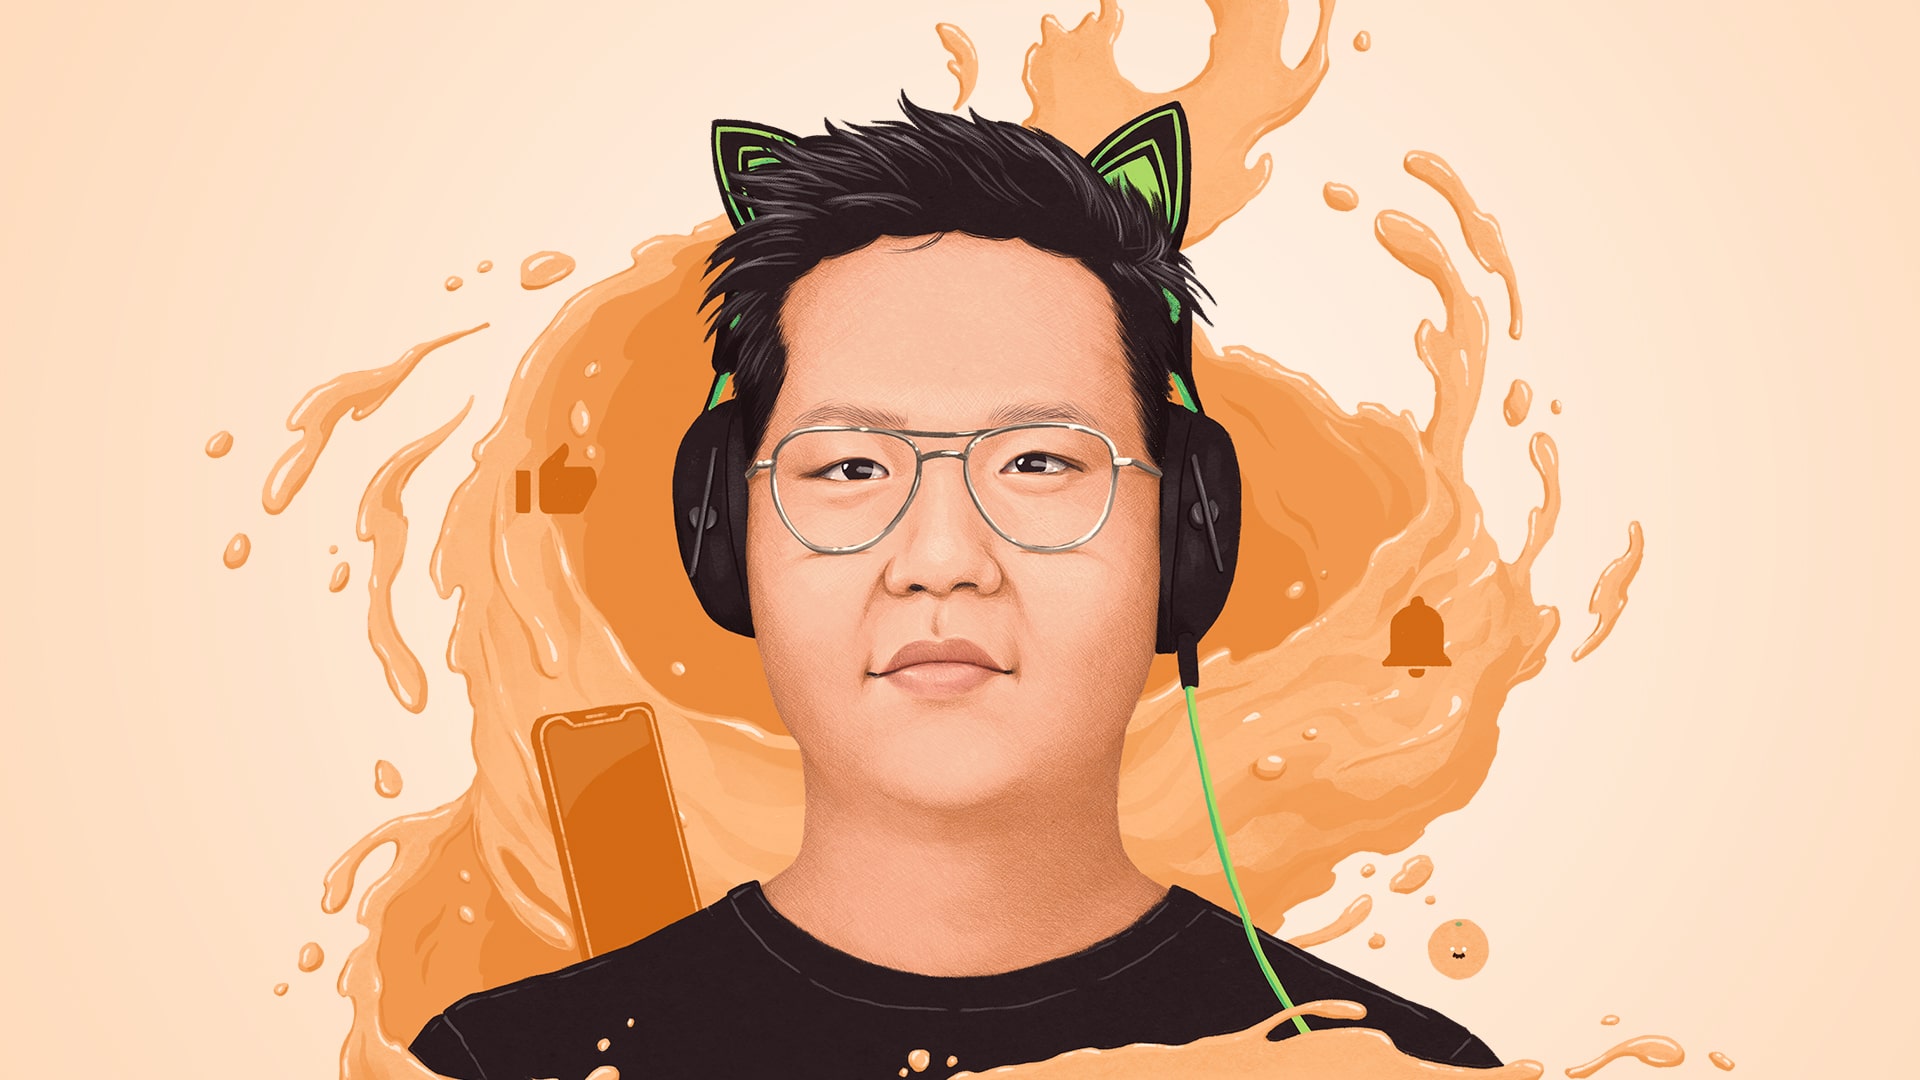 Illustration of YouTuber Jimmy Chau wearing his iconic cat-ear headset and surrounded by a swirl of orange juice.